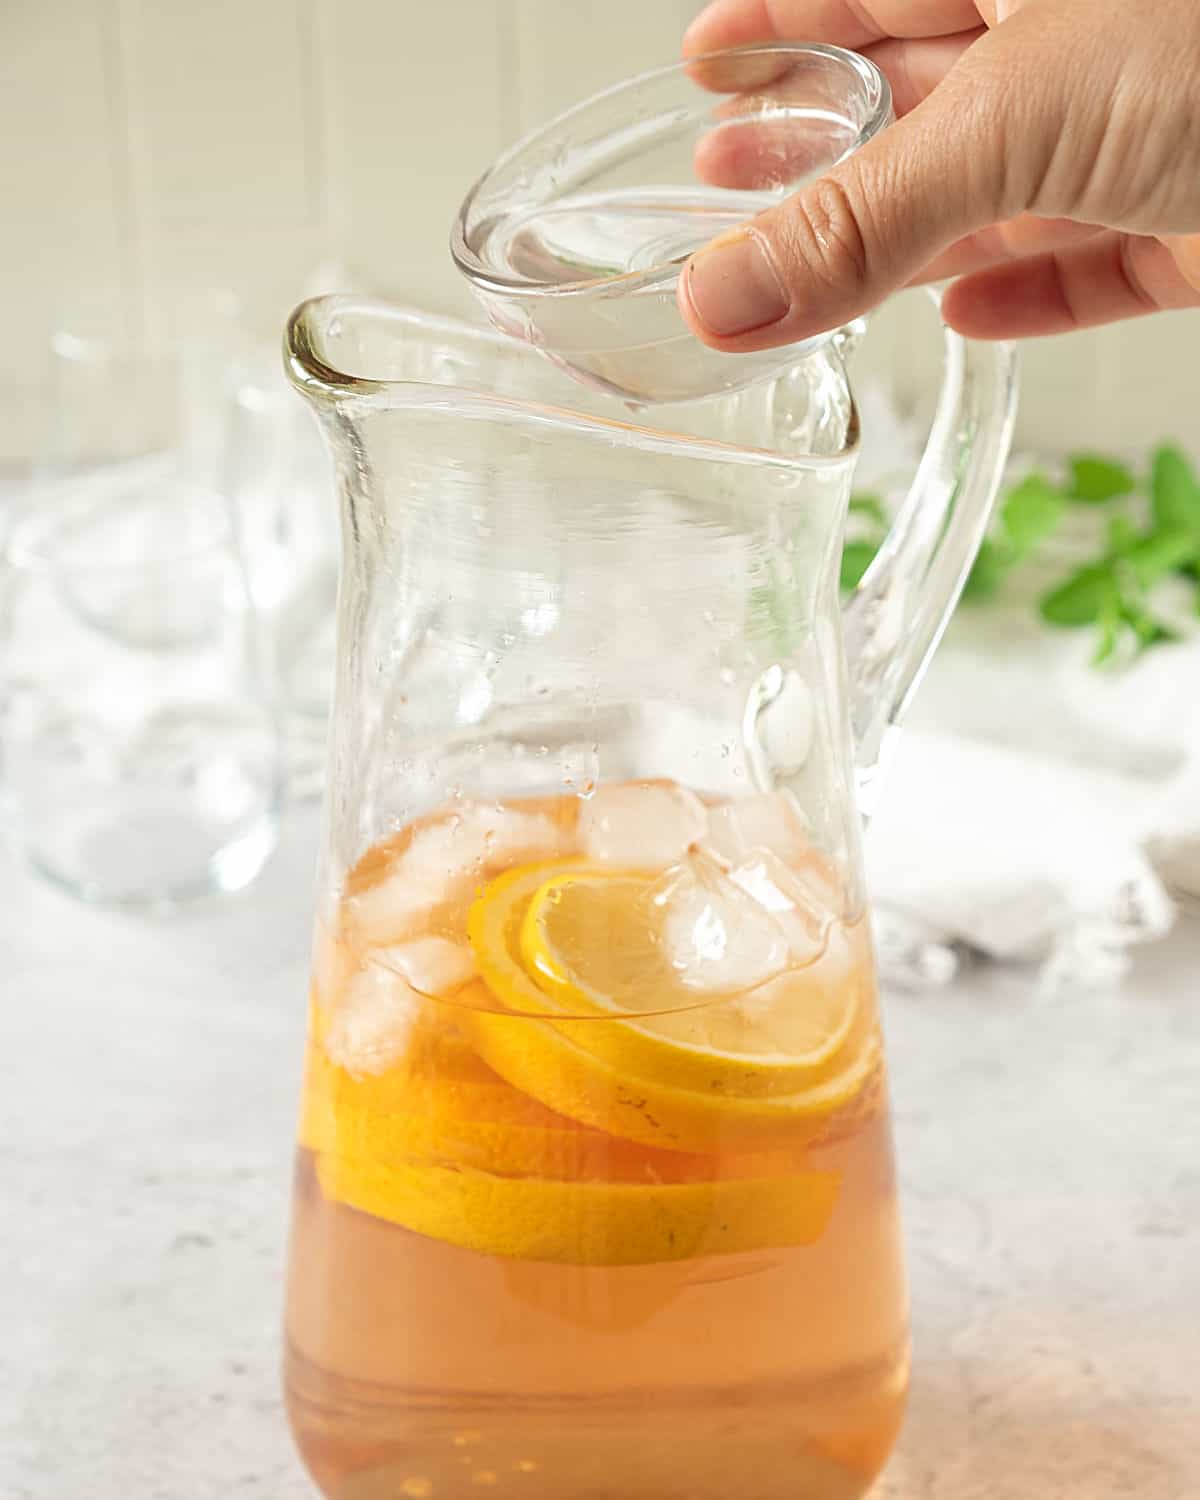 Adding clear syrup to a pitcher with rosé wine, citrus slices and ice. Light background with glasses.